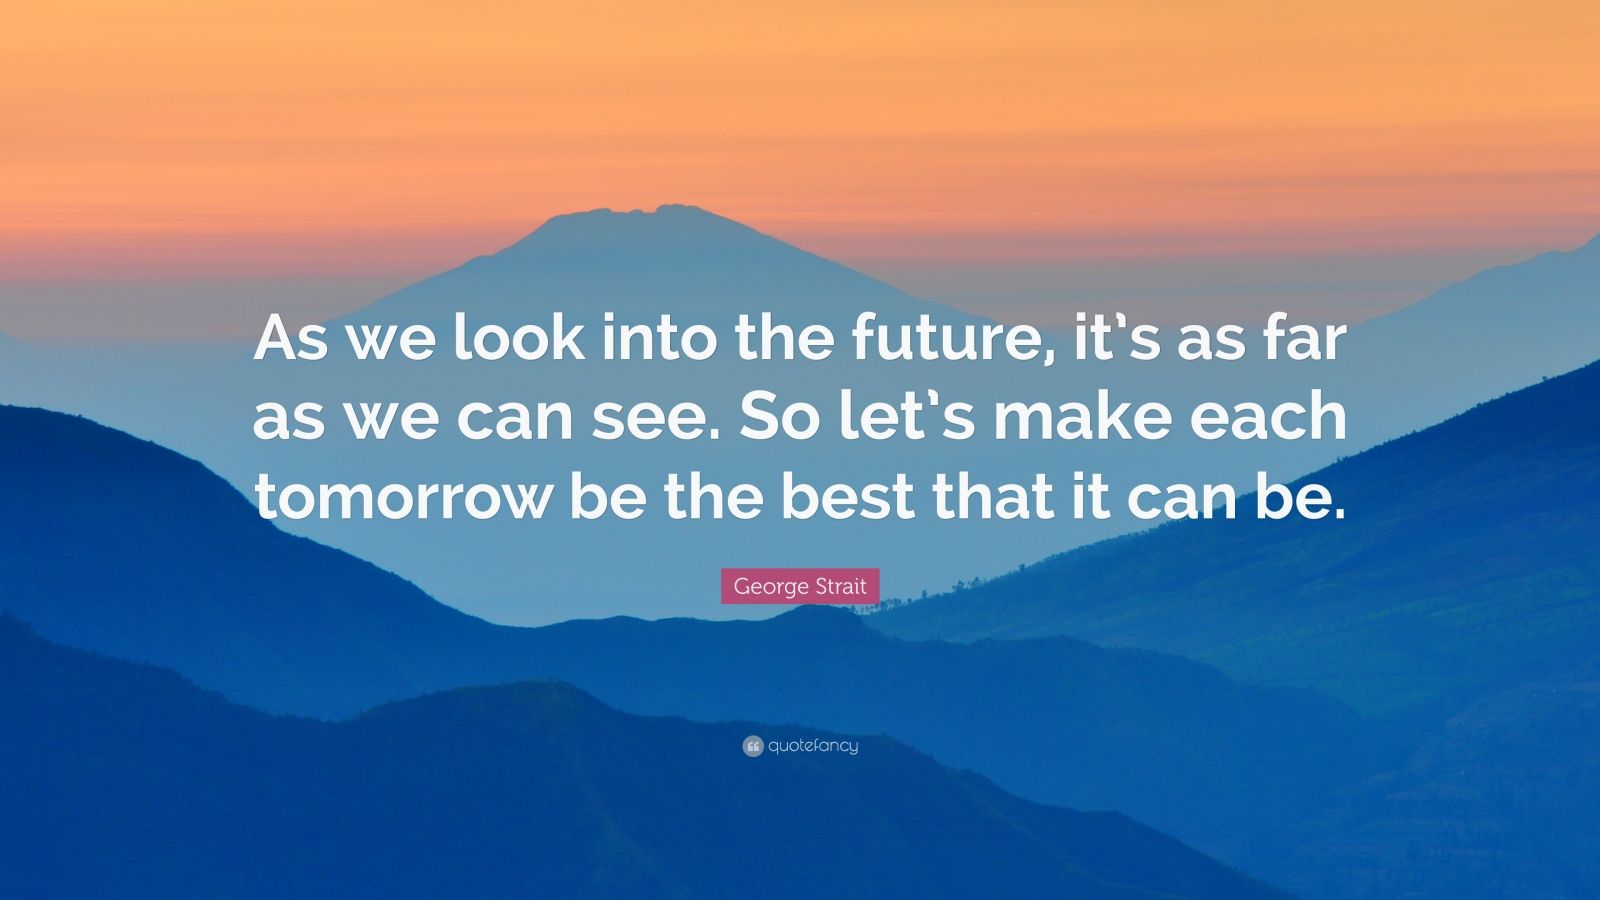 George Strait Quote: “As we look into the future, it’s as far as we can